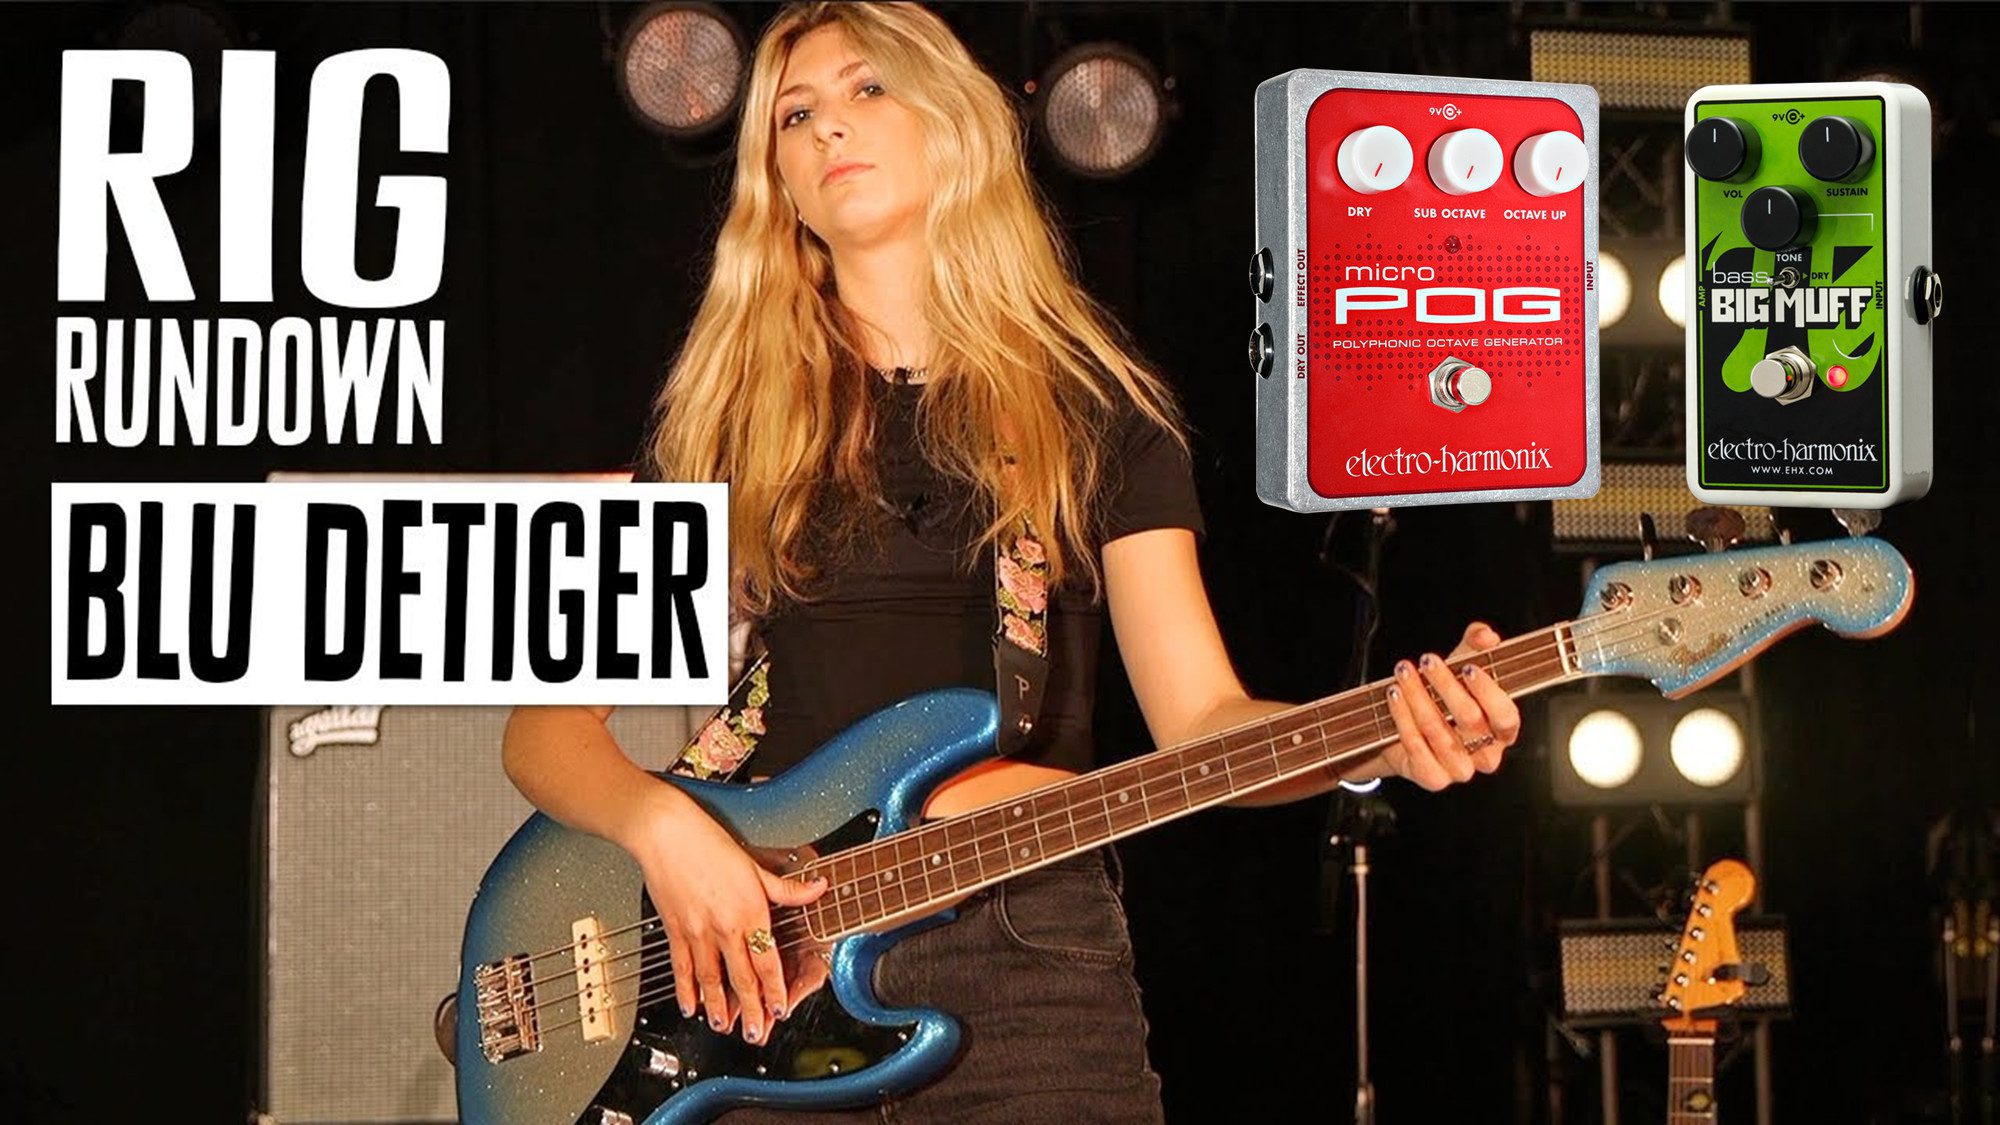 Blu DeTiger Gets the Party Popping with EHX Pedals